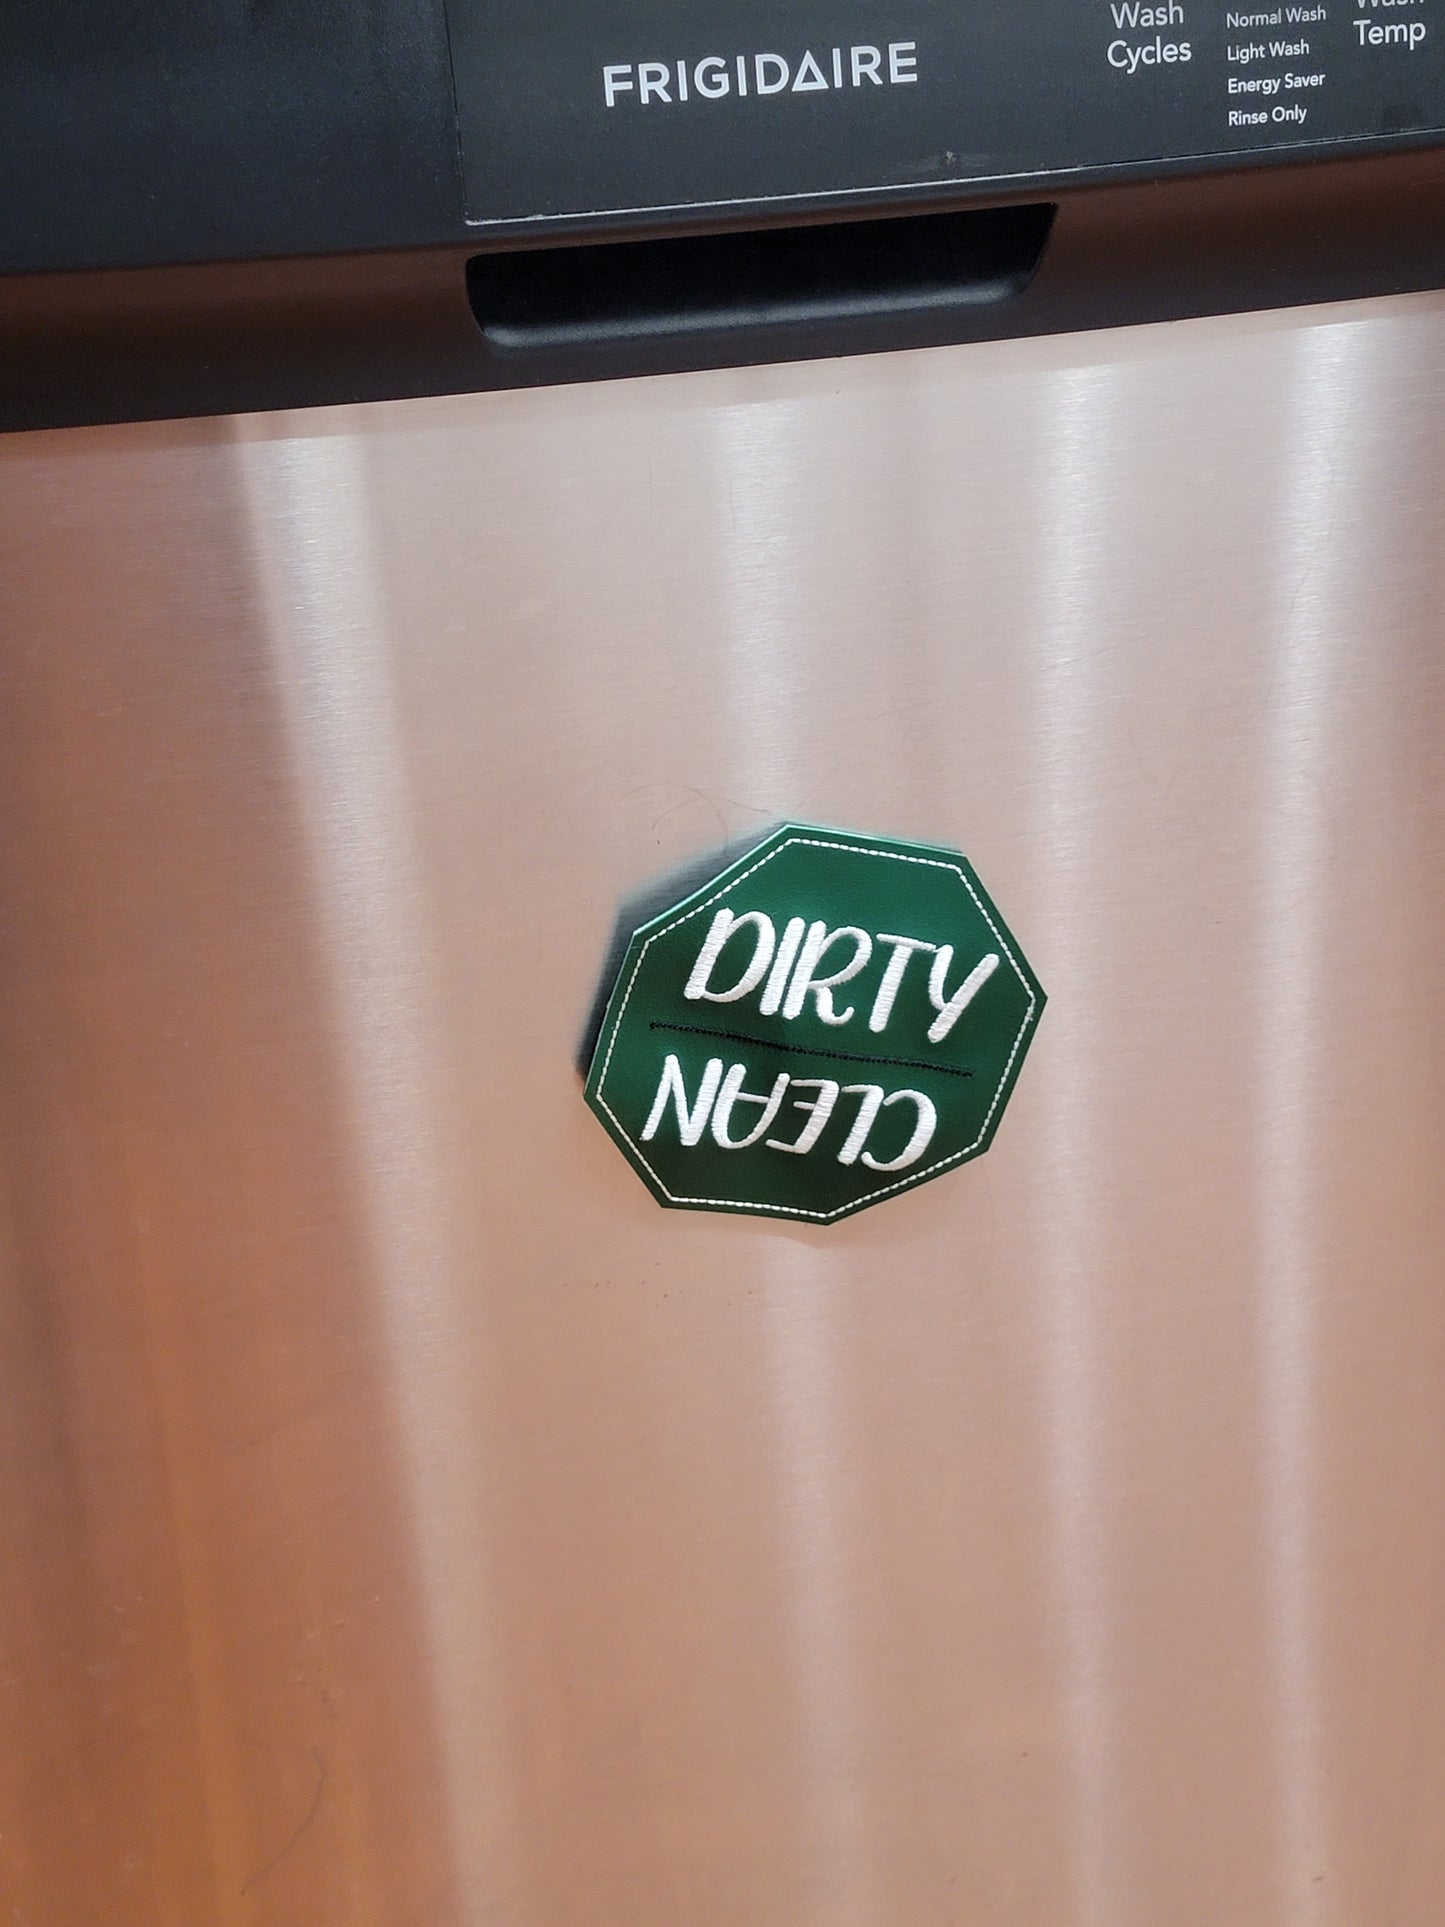 Dish washer Magnets